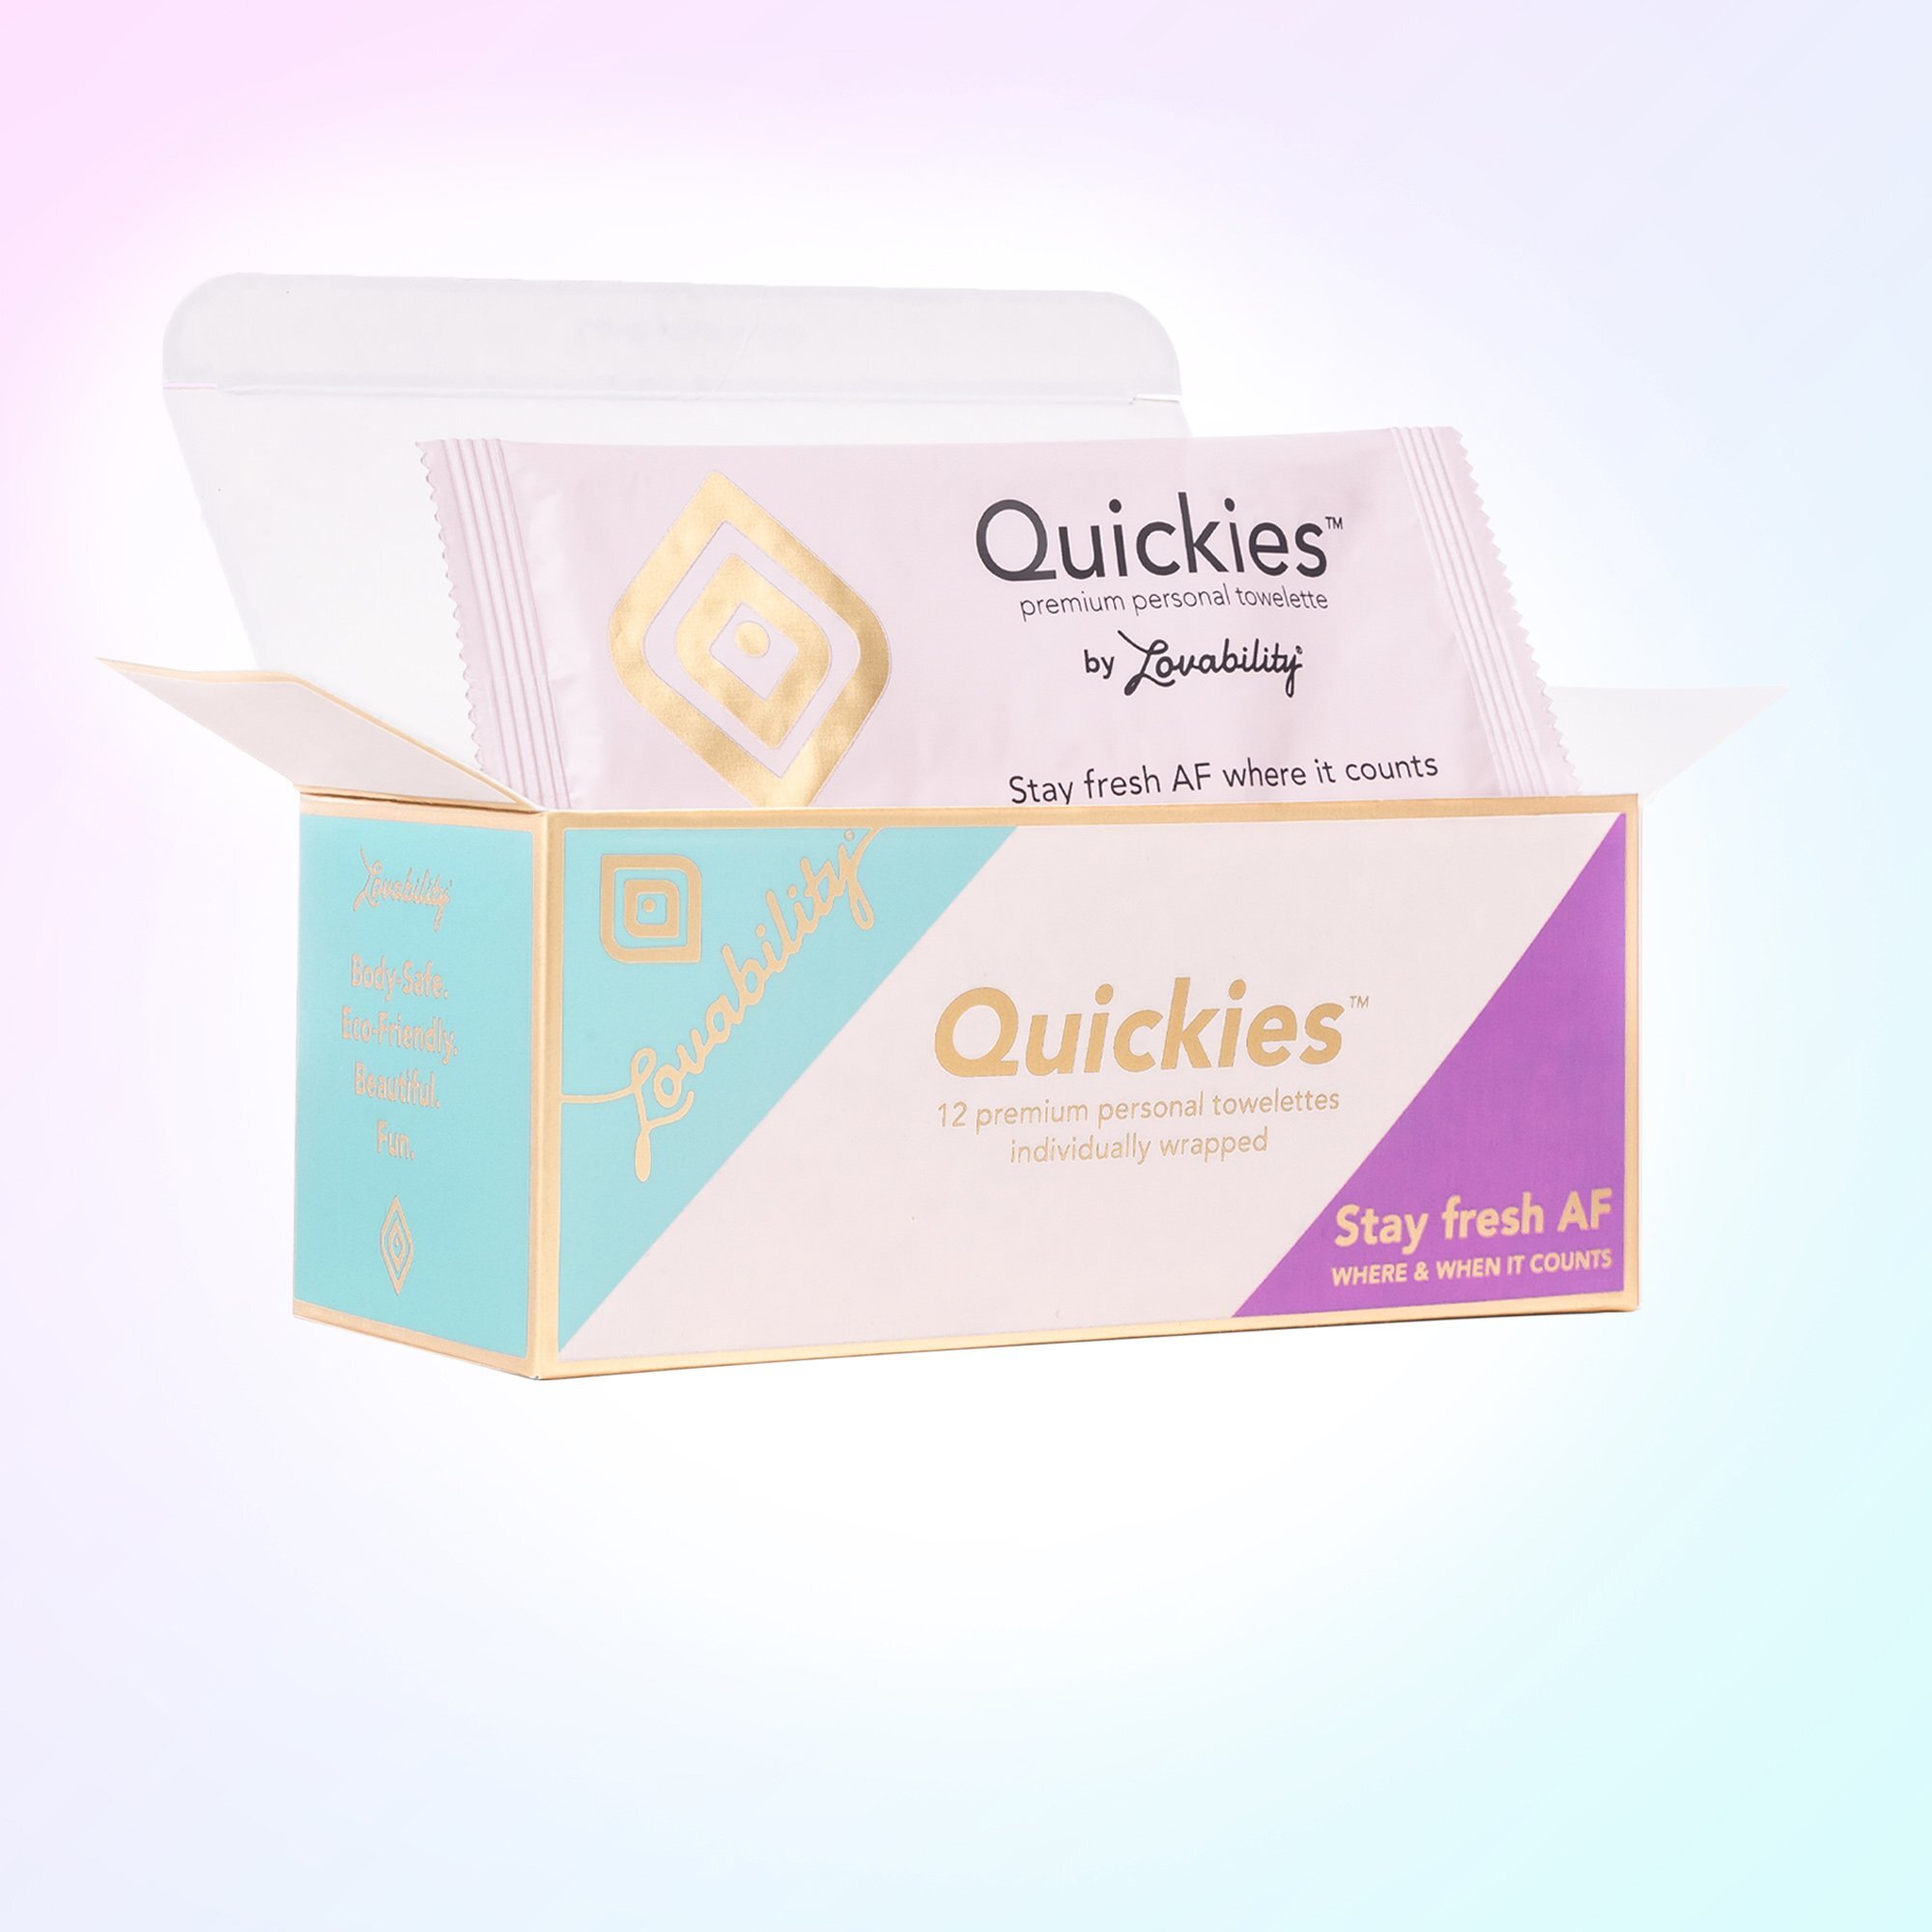 Quickies Towelettes by Lovability (online store)